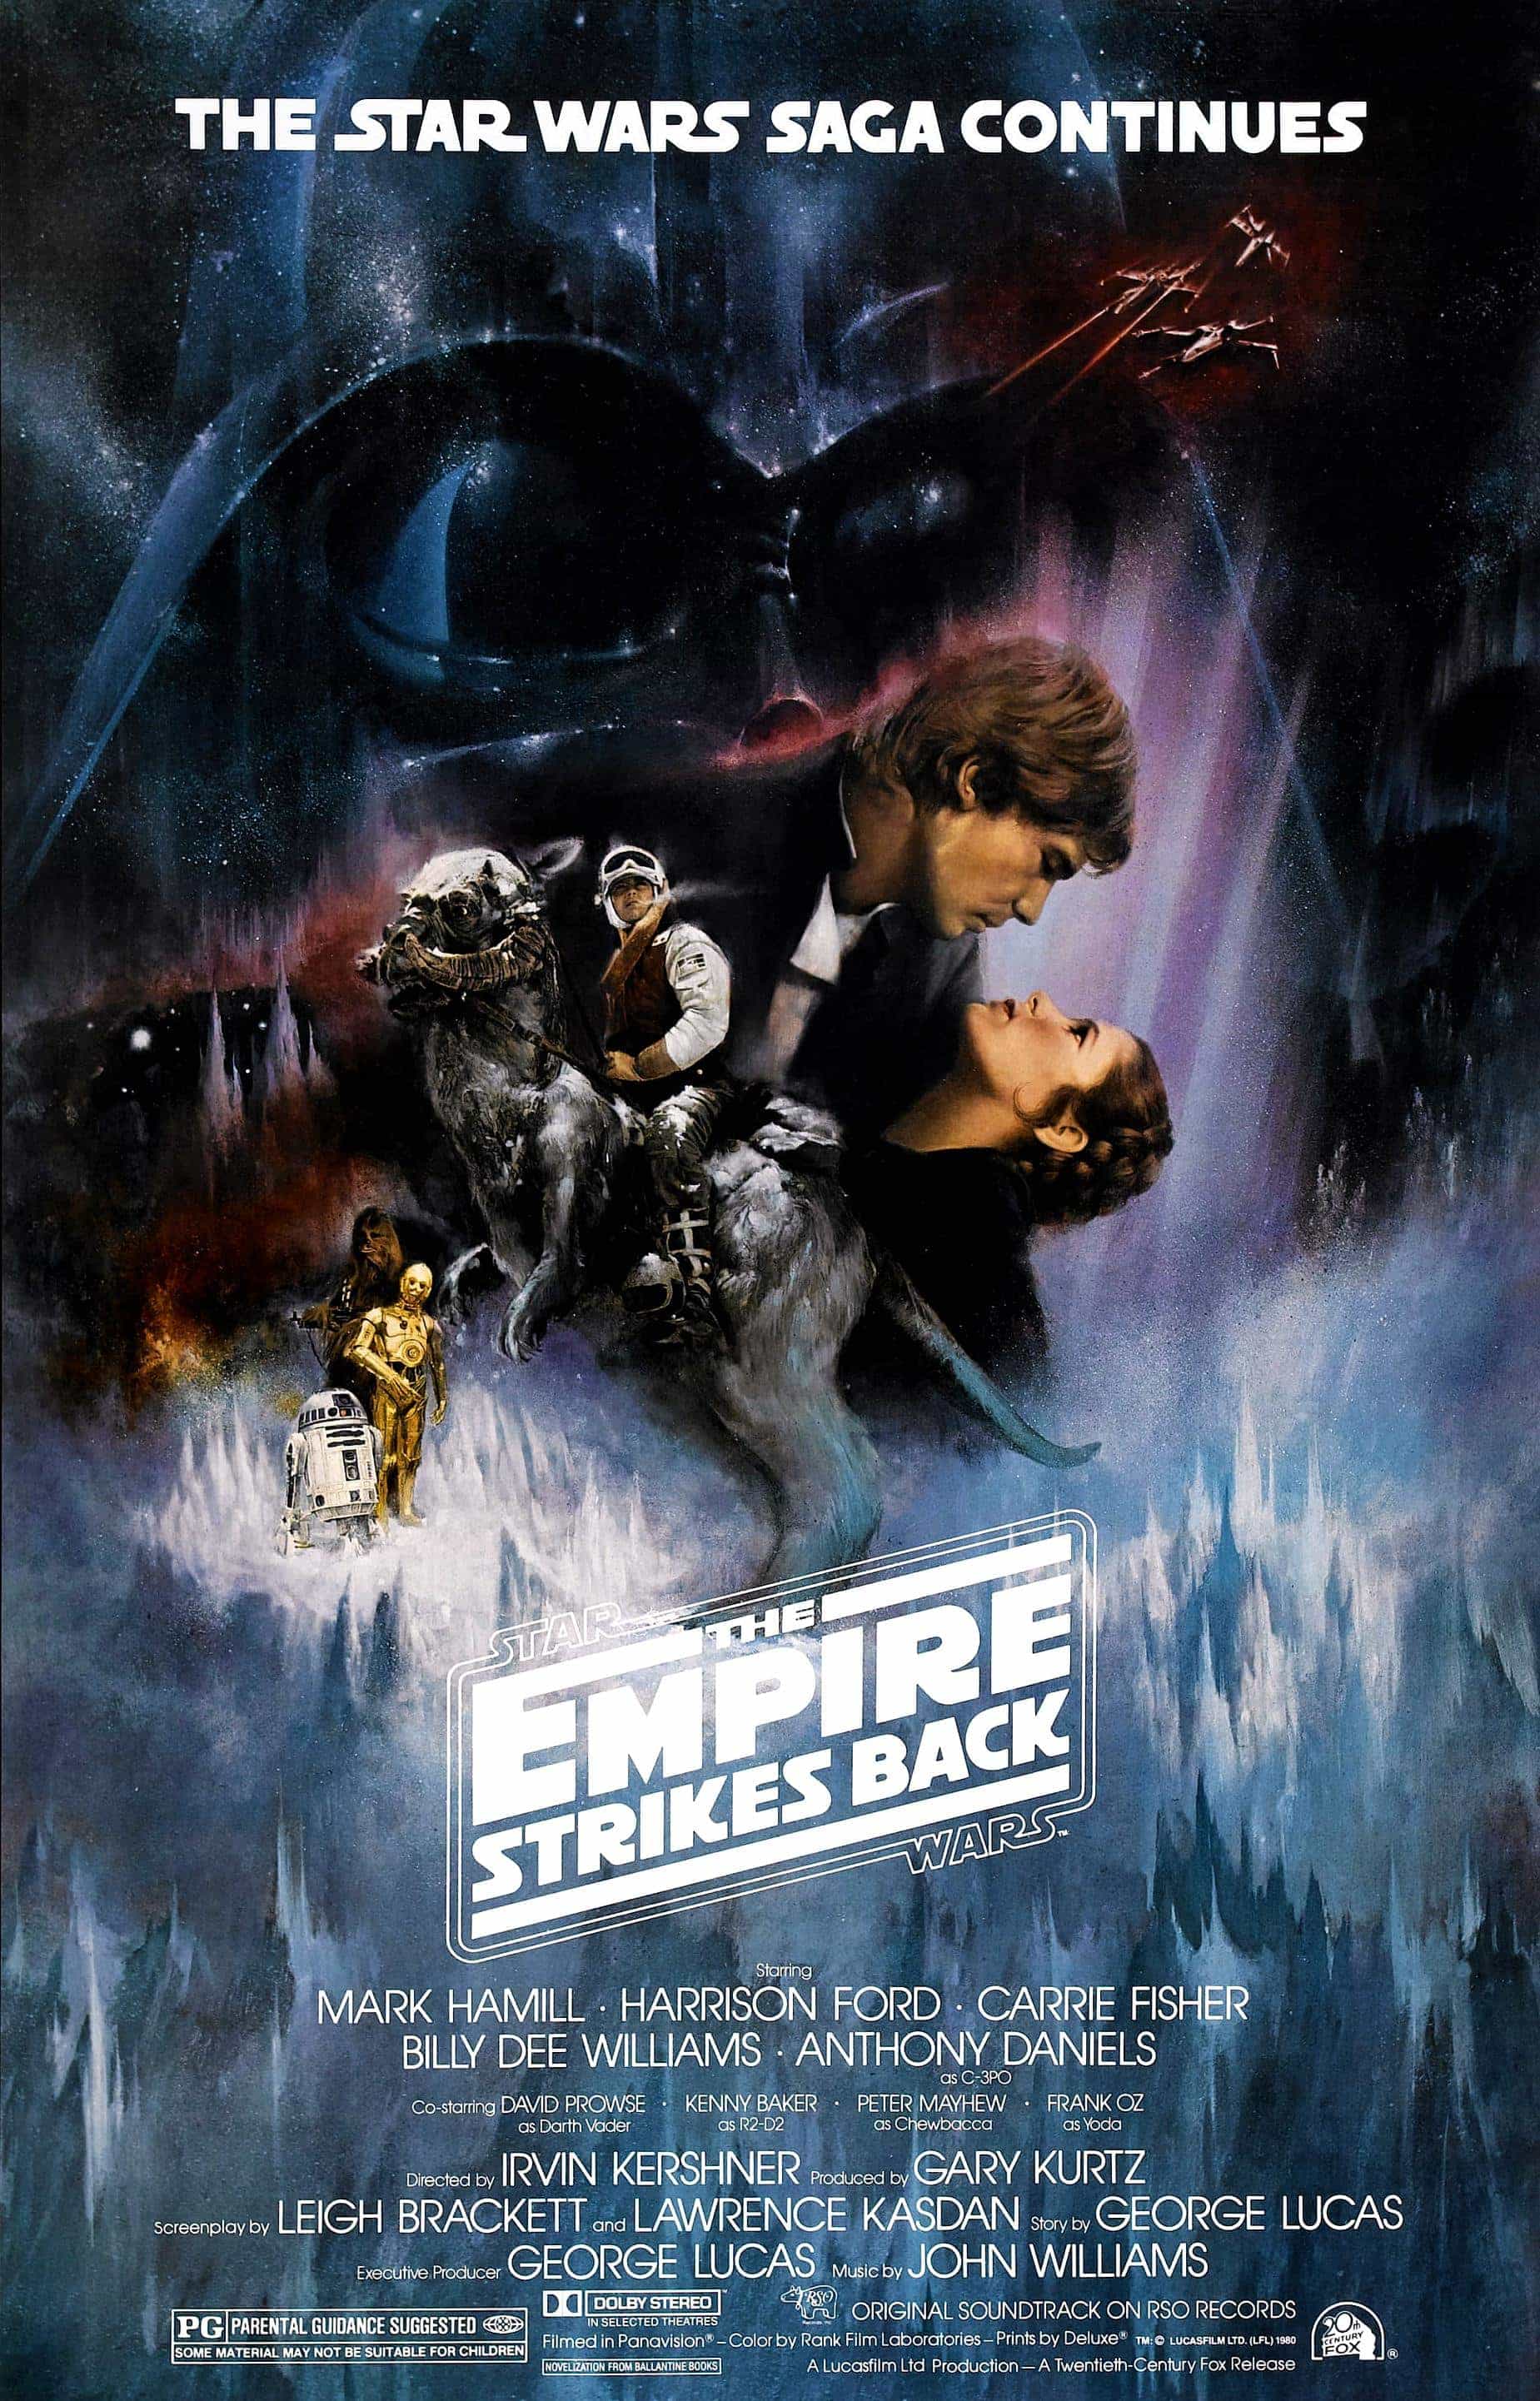 The BBFC reclassify The Empire Strikes Back as a PG age rated movie for moderate violence, mild threat